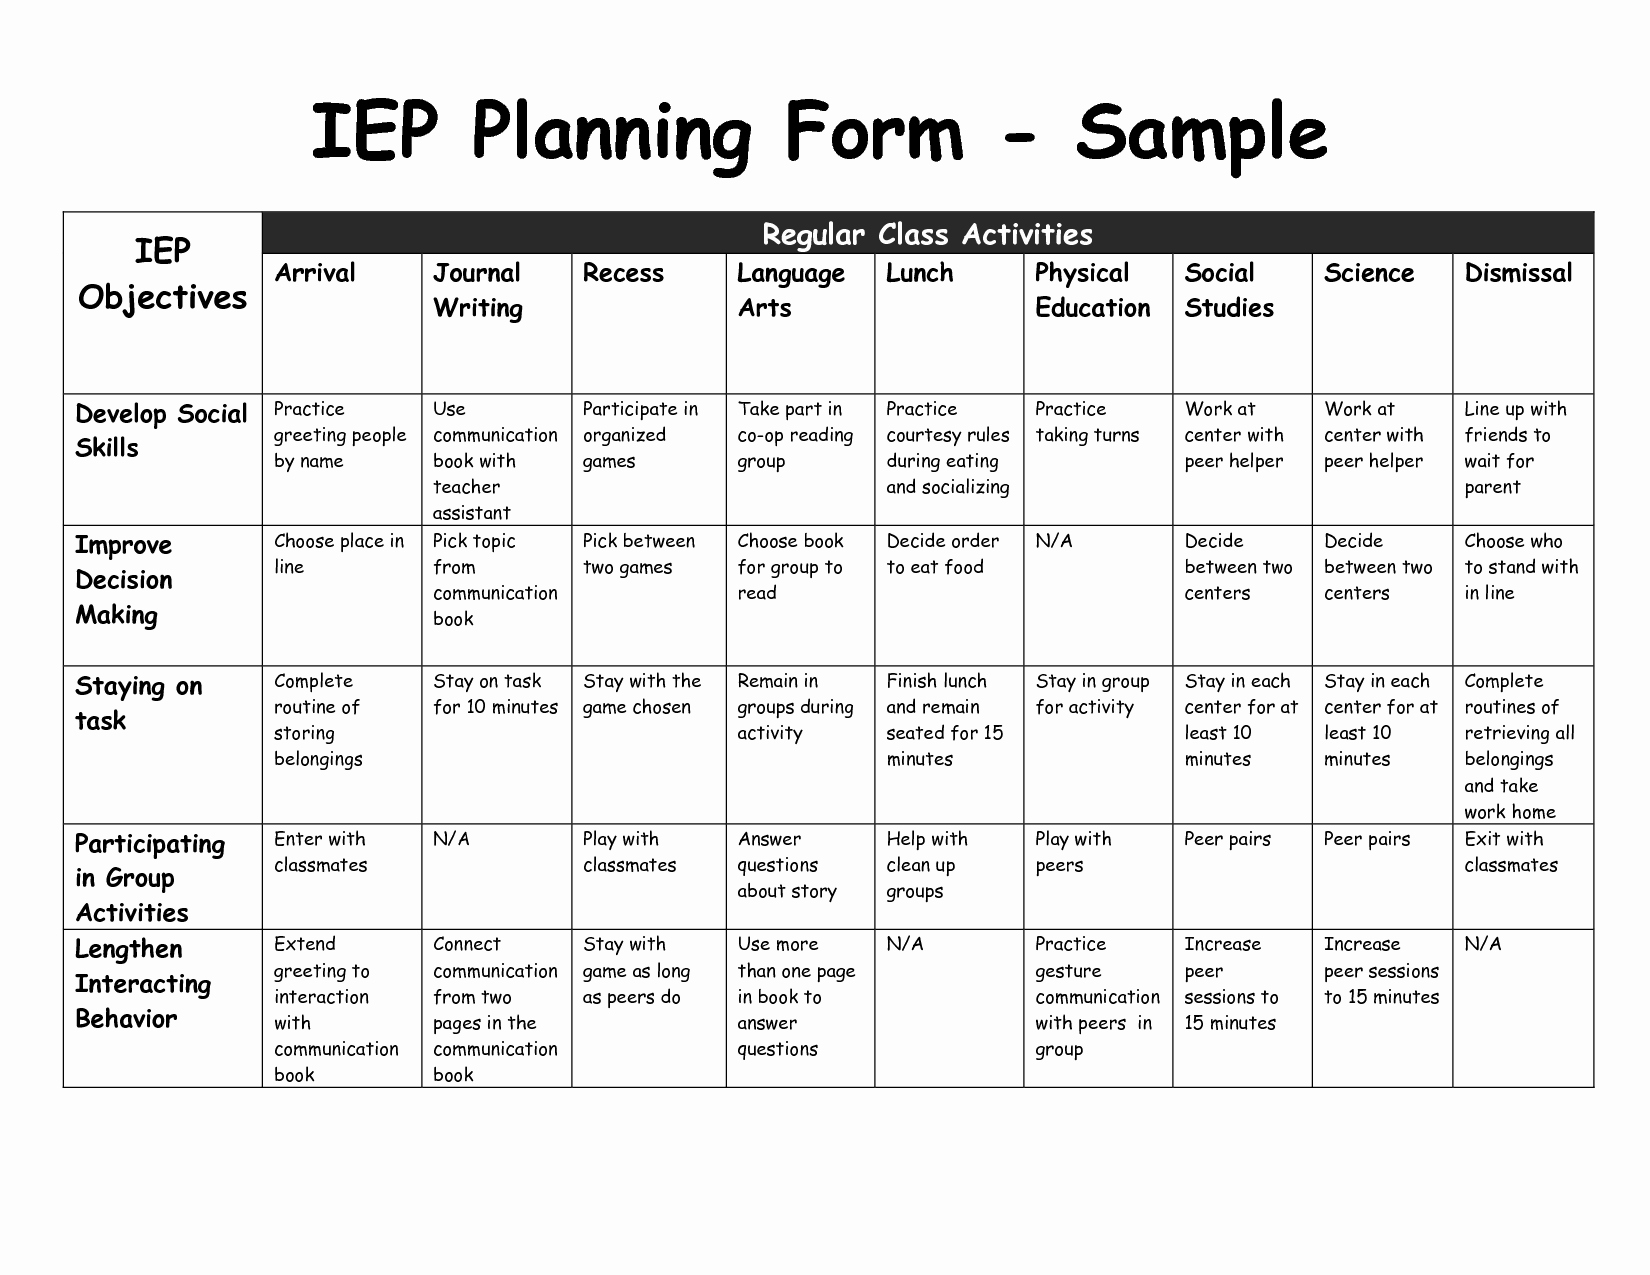 Personal Learning Plan Example Awesome Iep Iep Planning form Sample